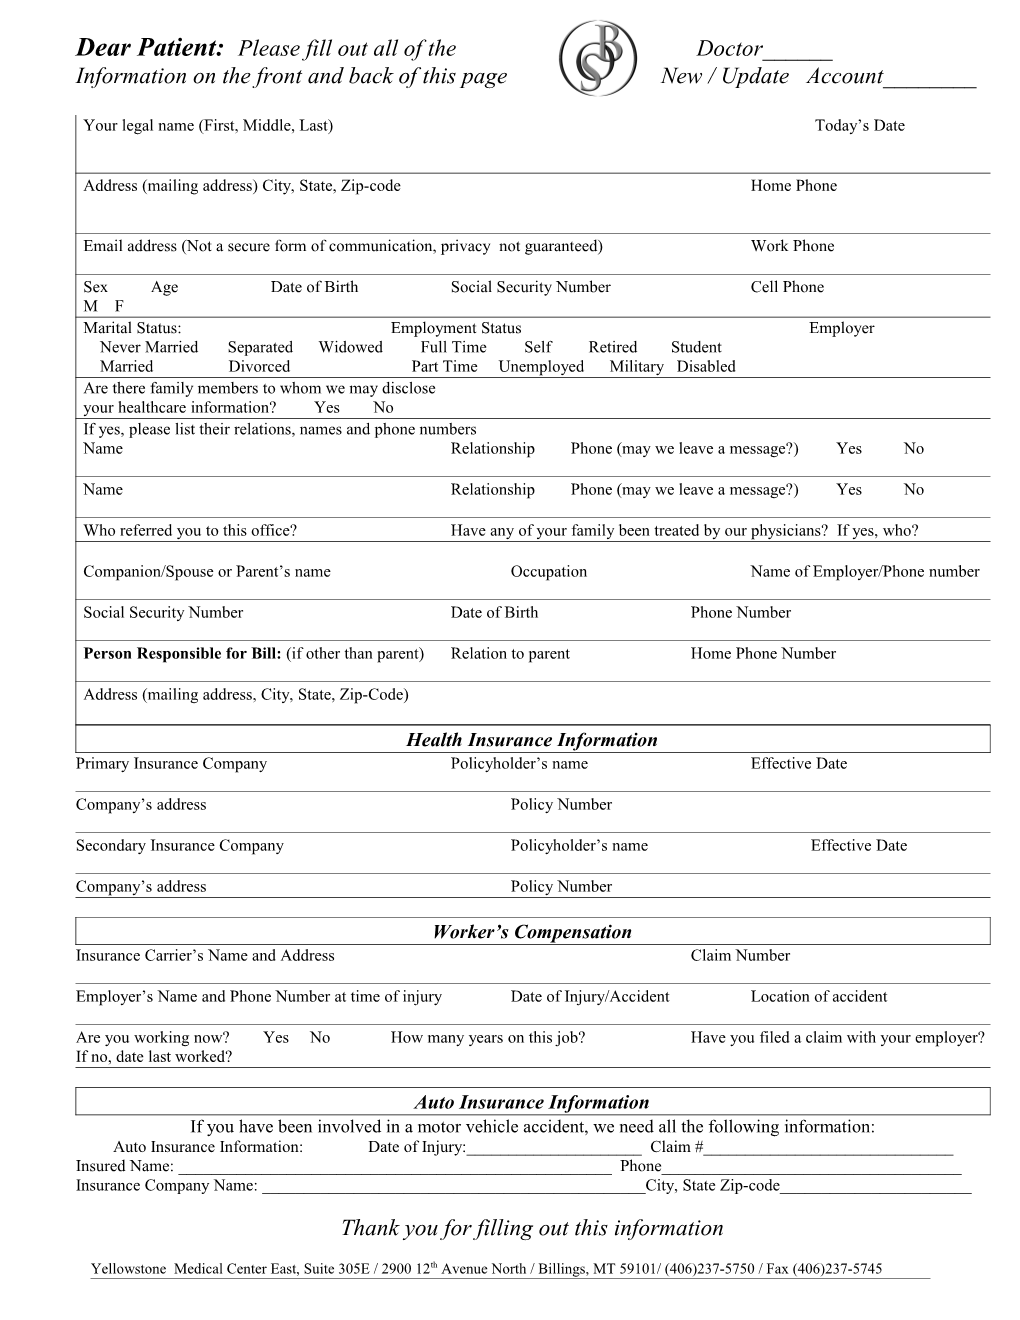 Dear Patient: Please Fill out All of The